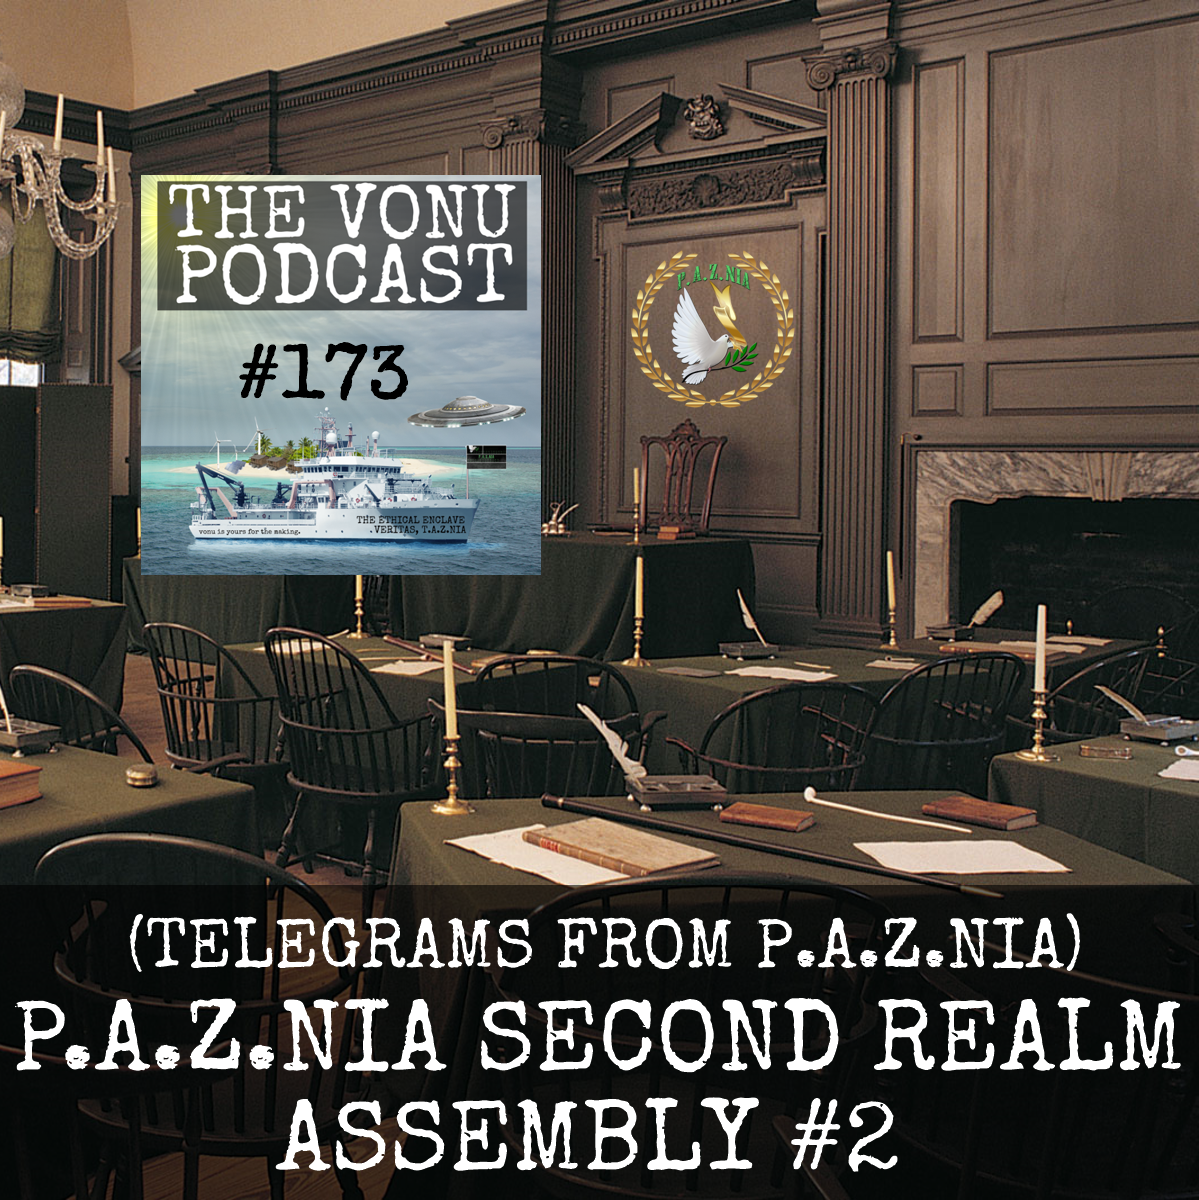 TVP #173: P.A.Z.NIA Second Realm Assembly #2 (Telegrams From P.A.Z.NIA with Rex, Bastard Chris, Bueller, & More)